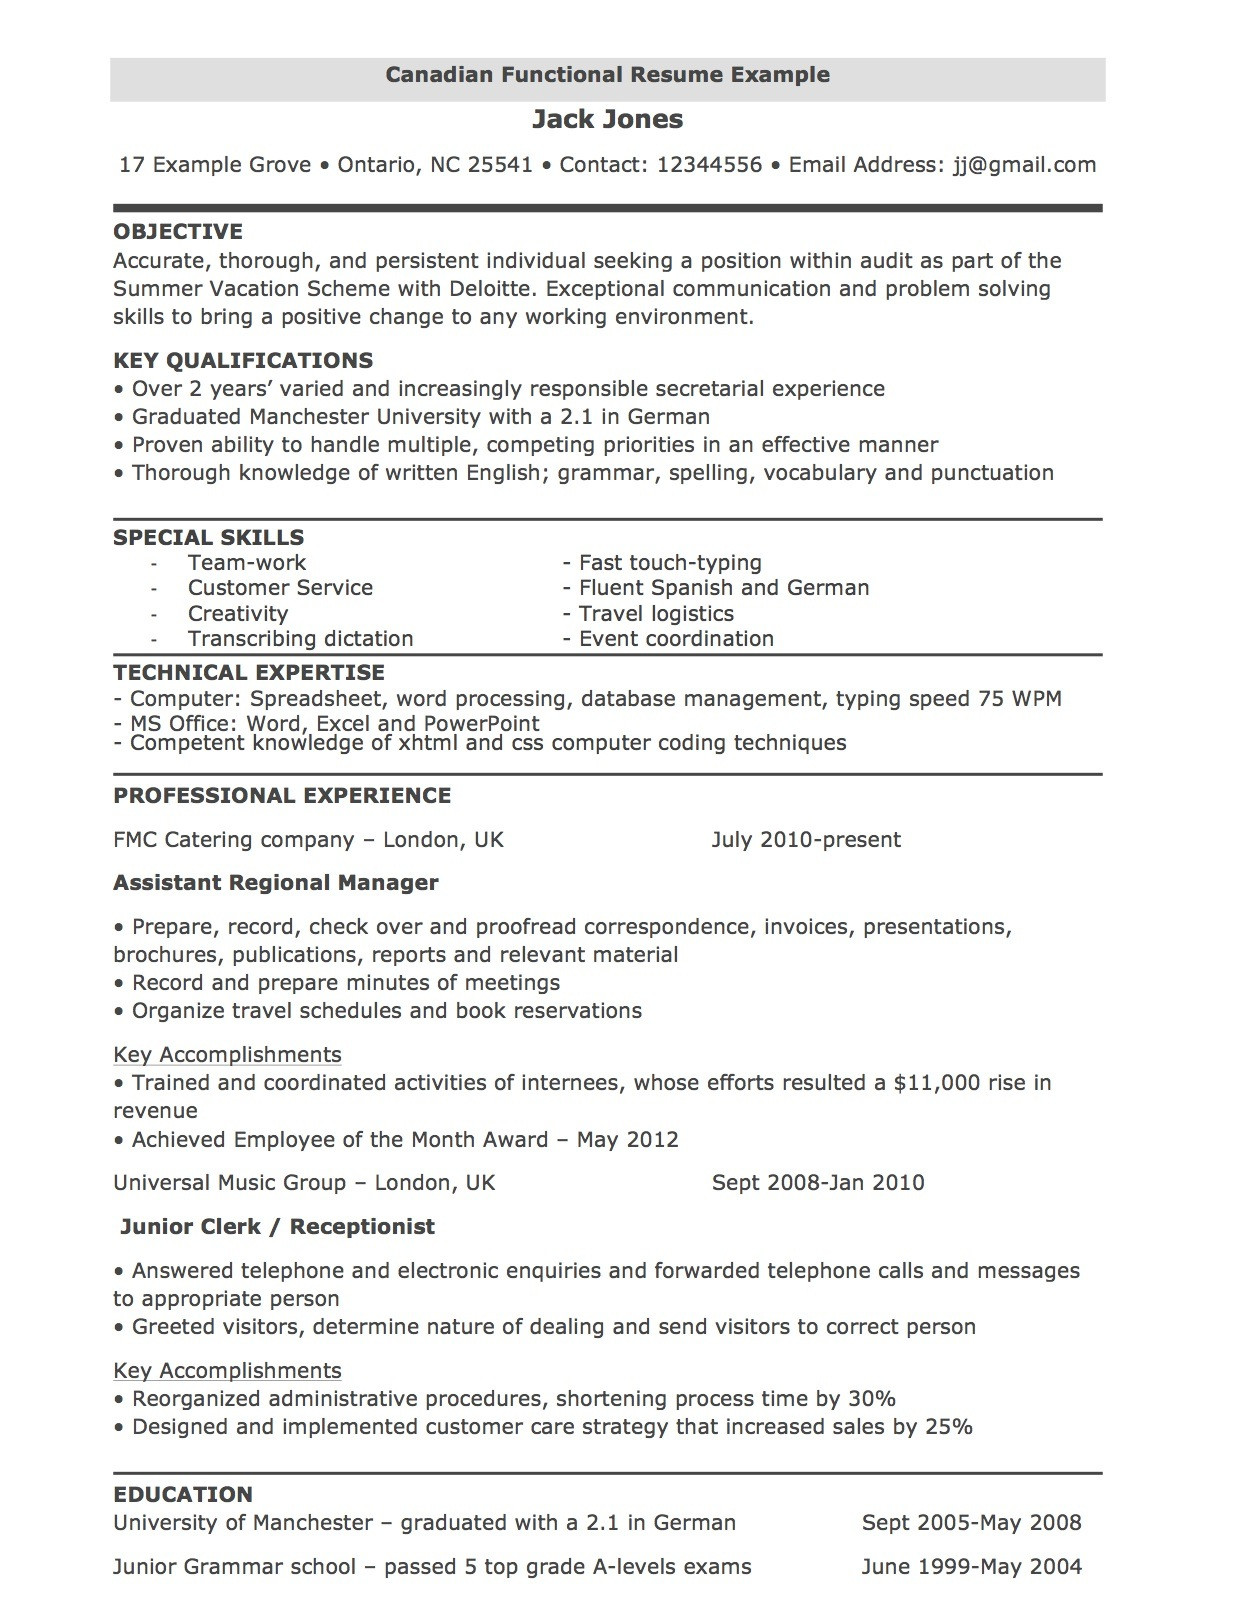 Functional Resume Template for College Student Templates and Examples – Joblers